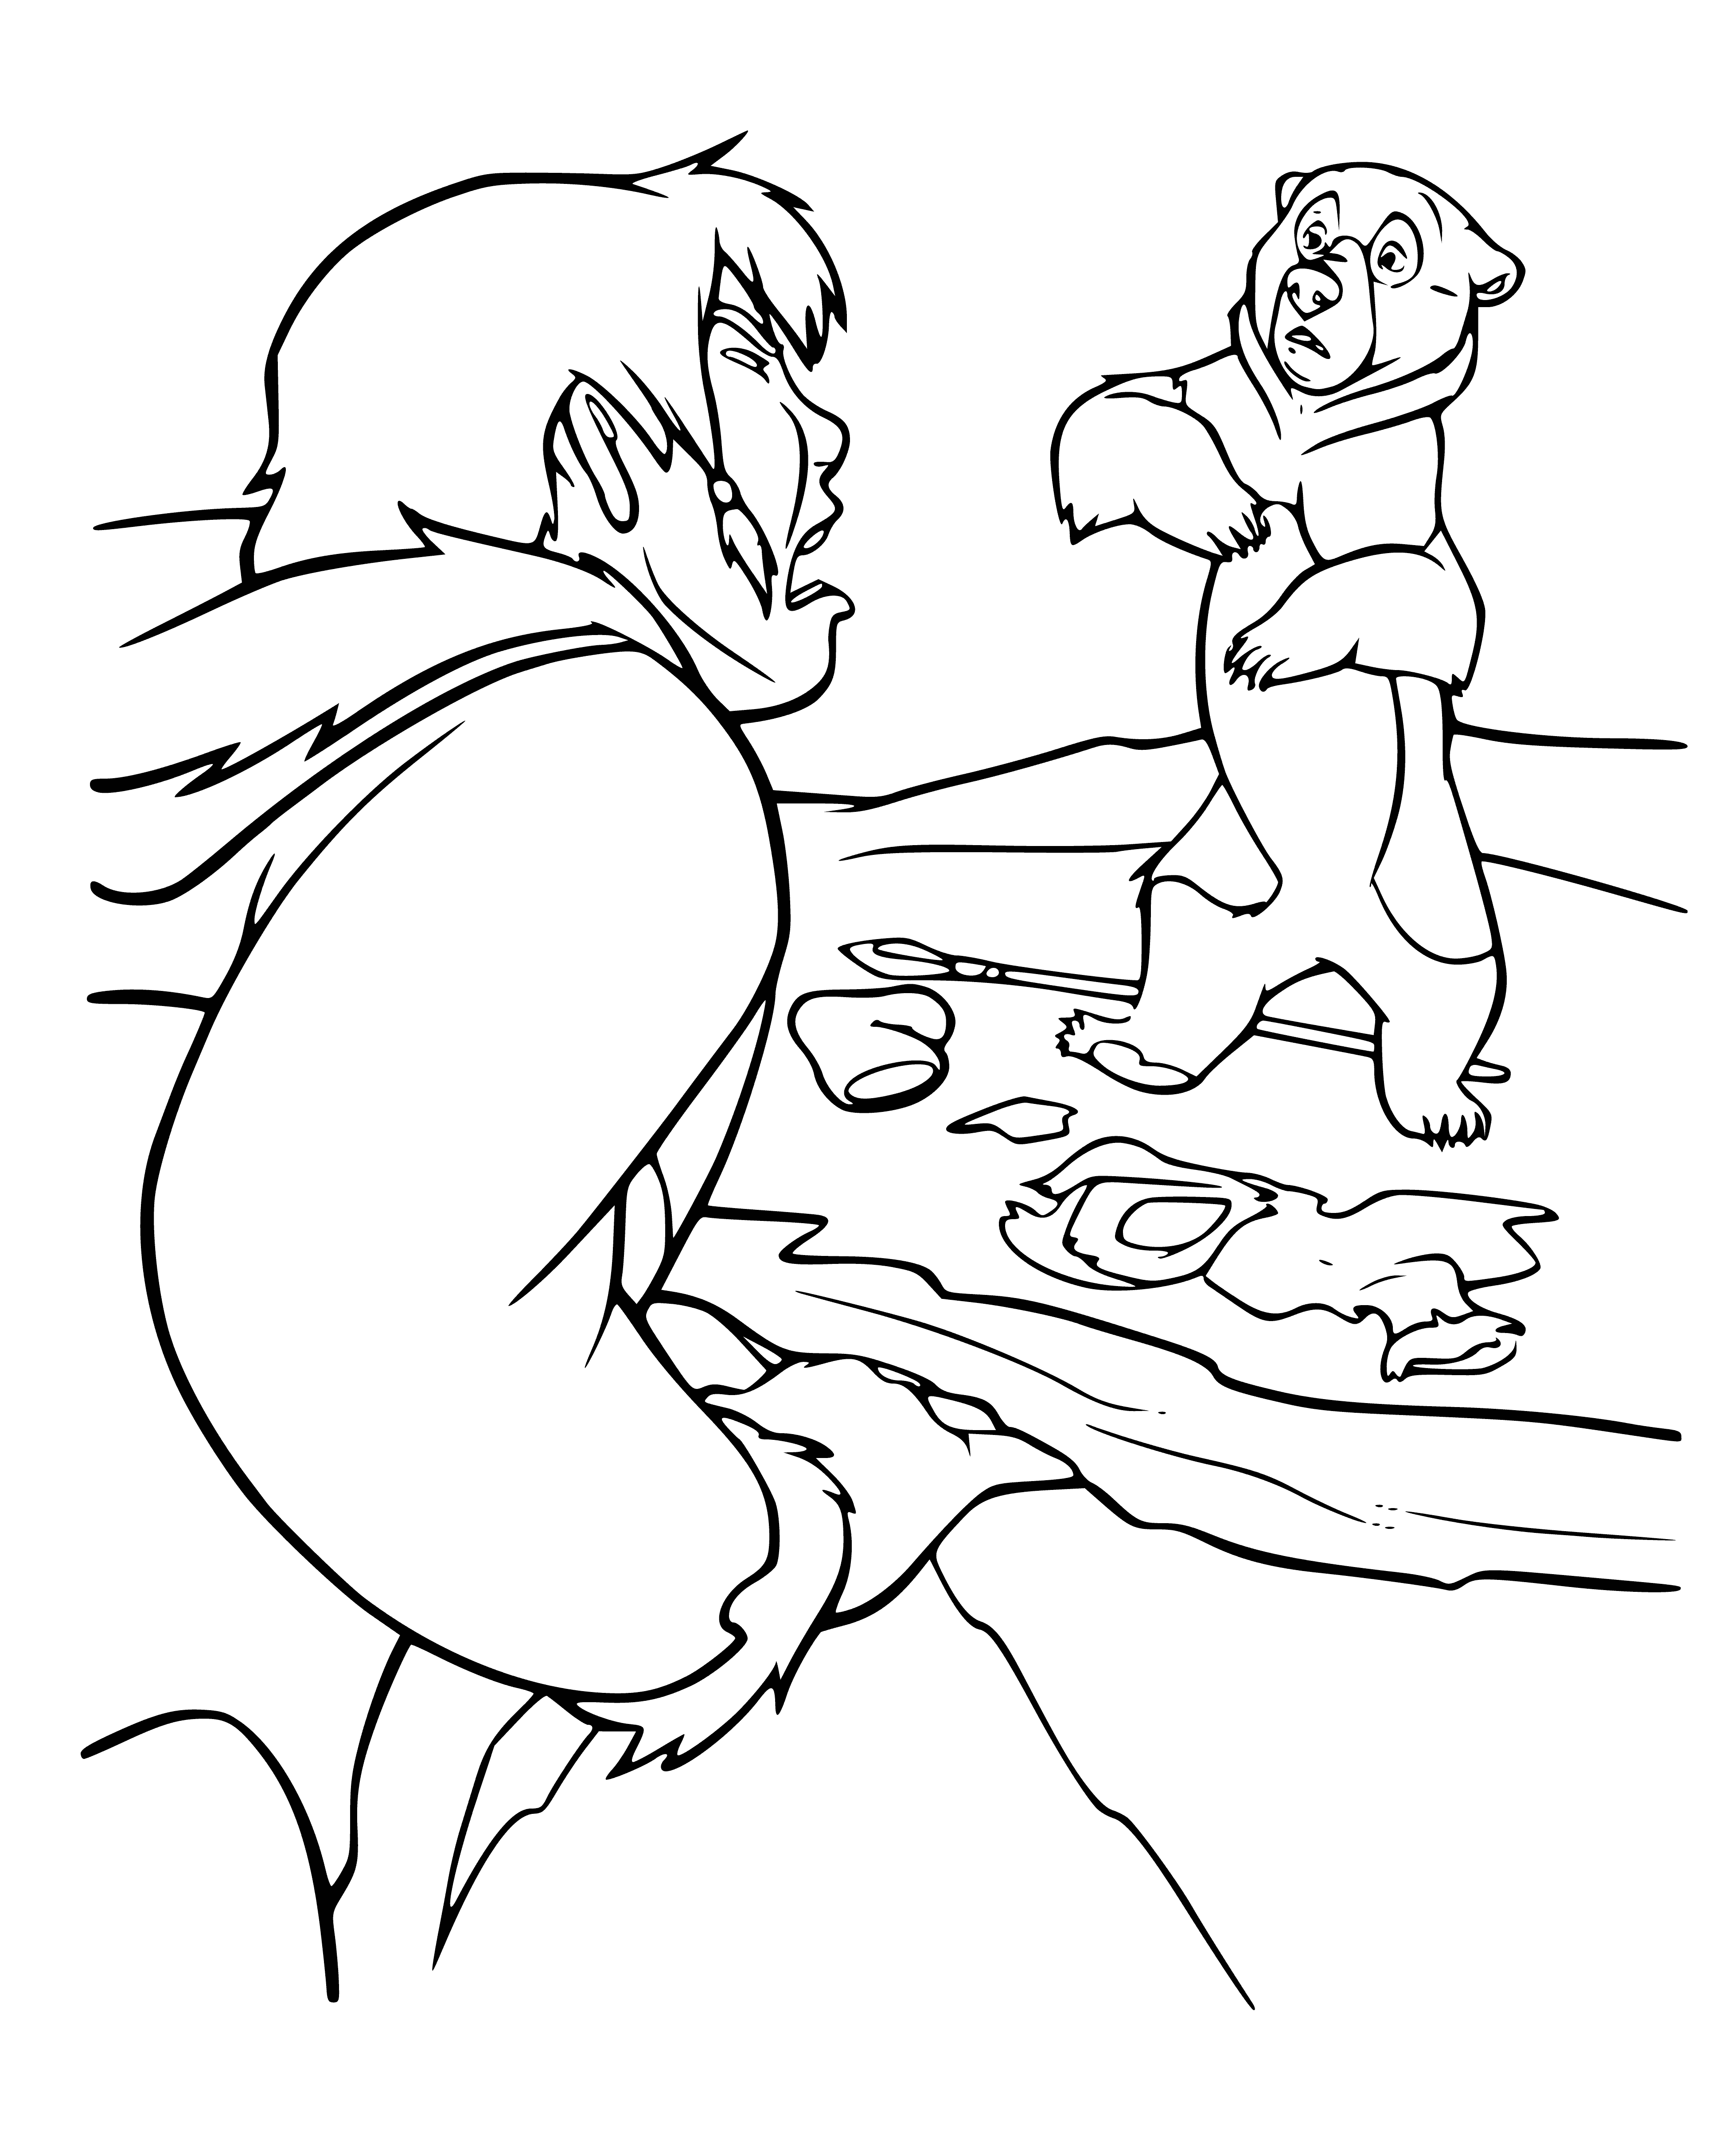 coloring page: Kenai turns into a bear with dark fur, mid-step, looking off into the distance in a coloring page.